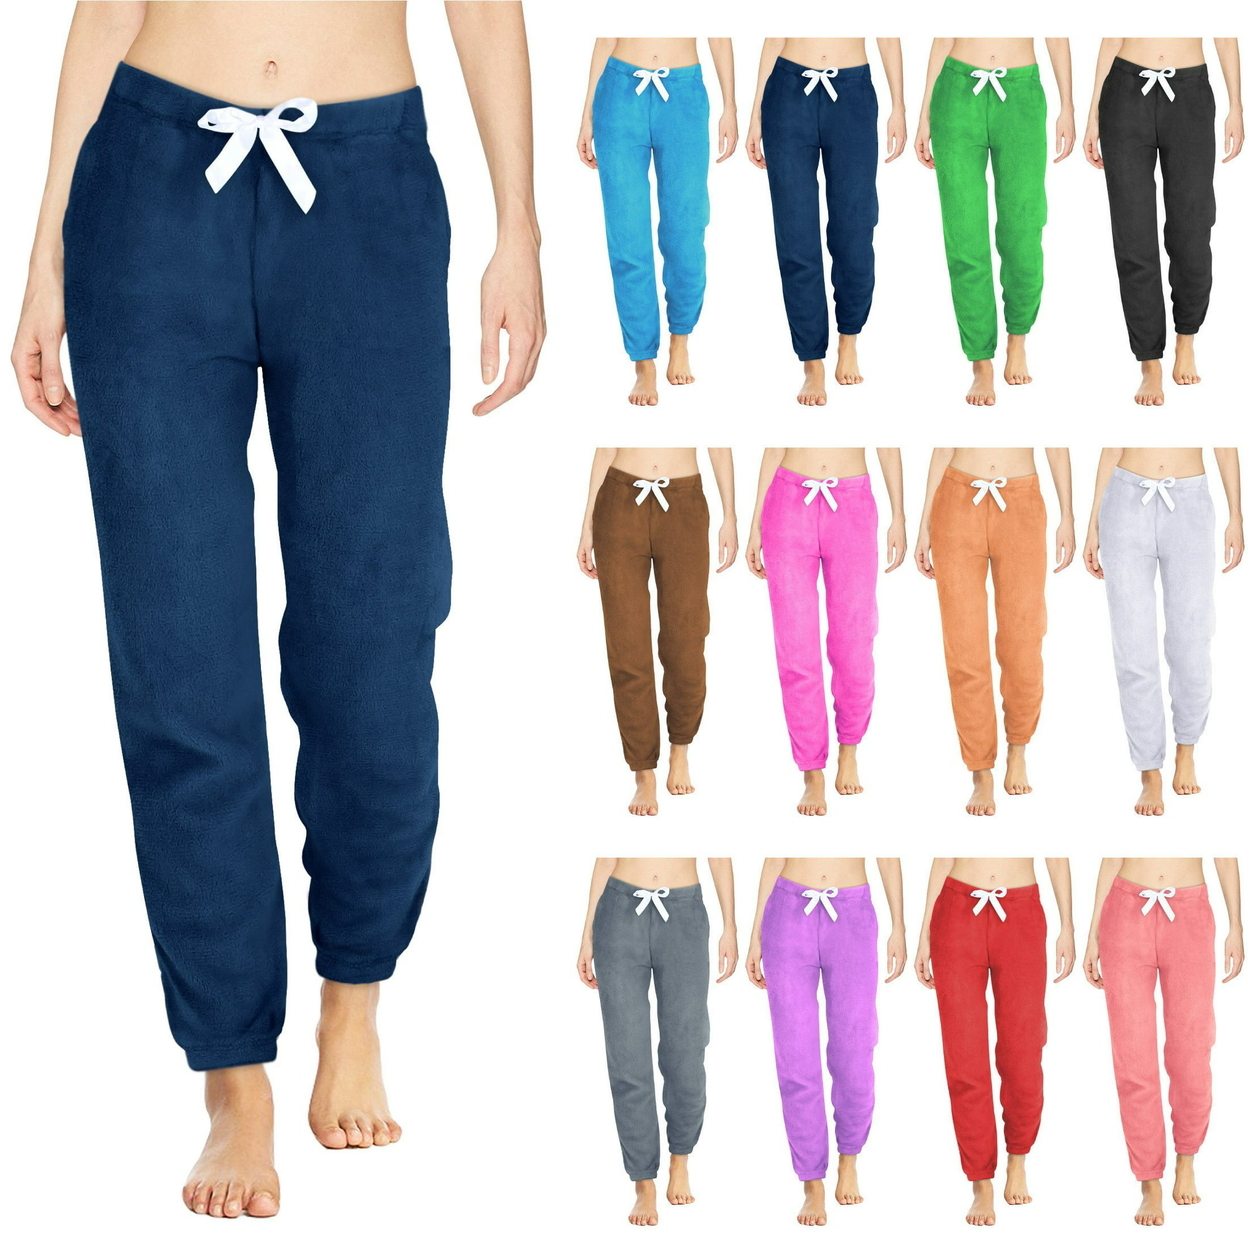 Multi-Pack: Women's Solid & Printed Ultra-Soft Comfy Stretch Micro-Fleece Pajama Lounge Pants - 3-pack, Xx-large, Shapes